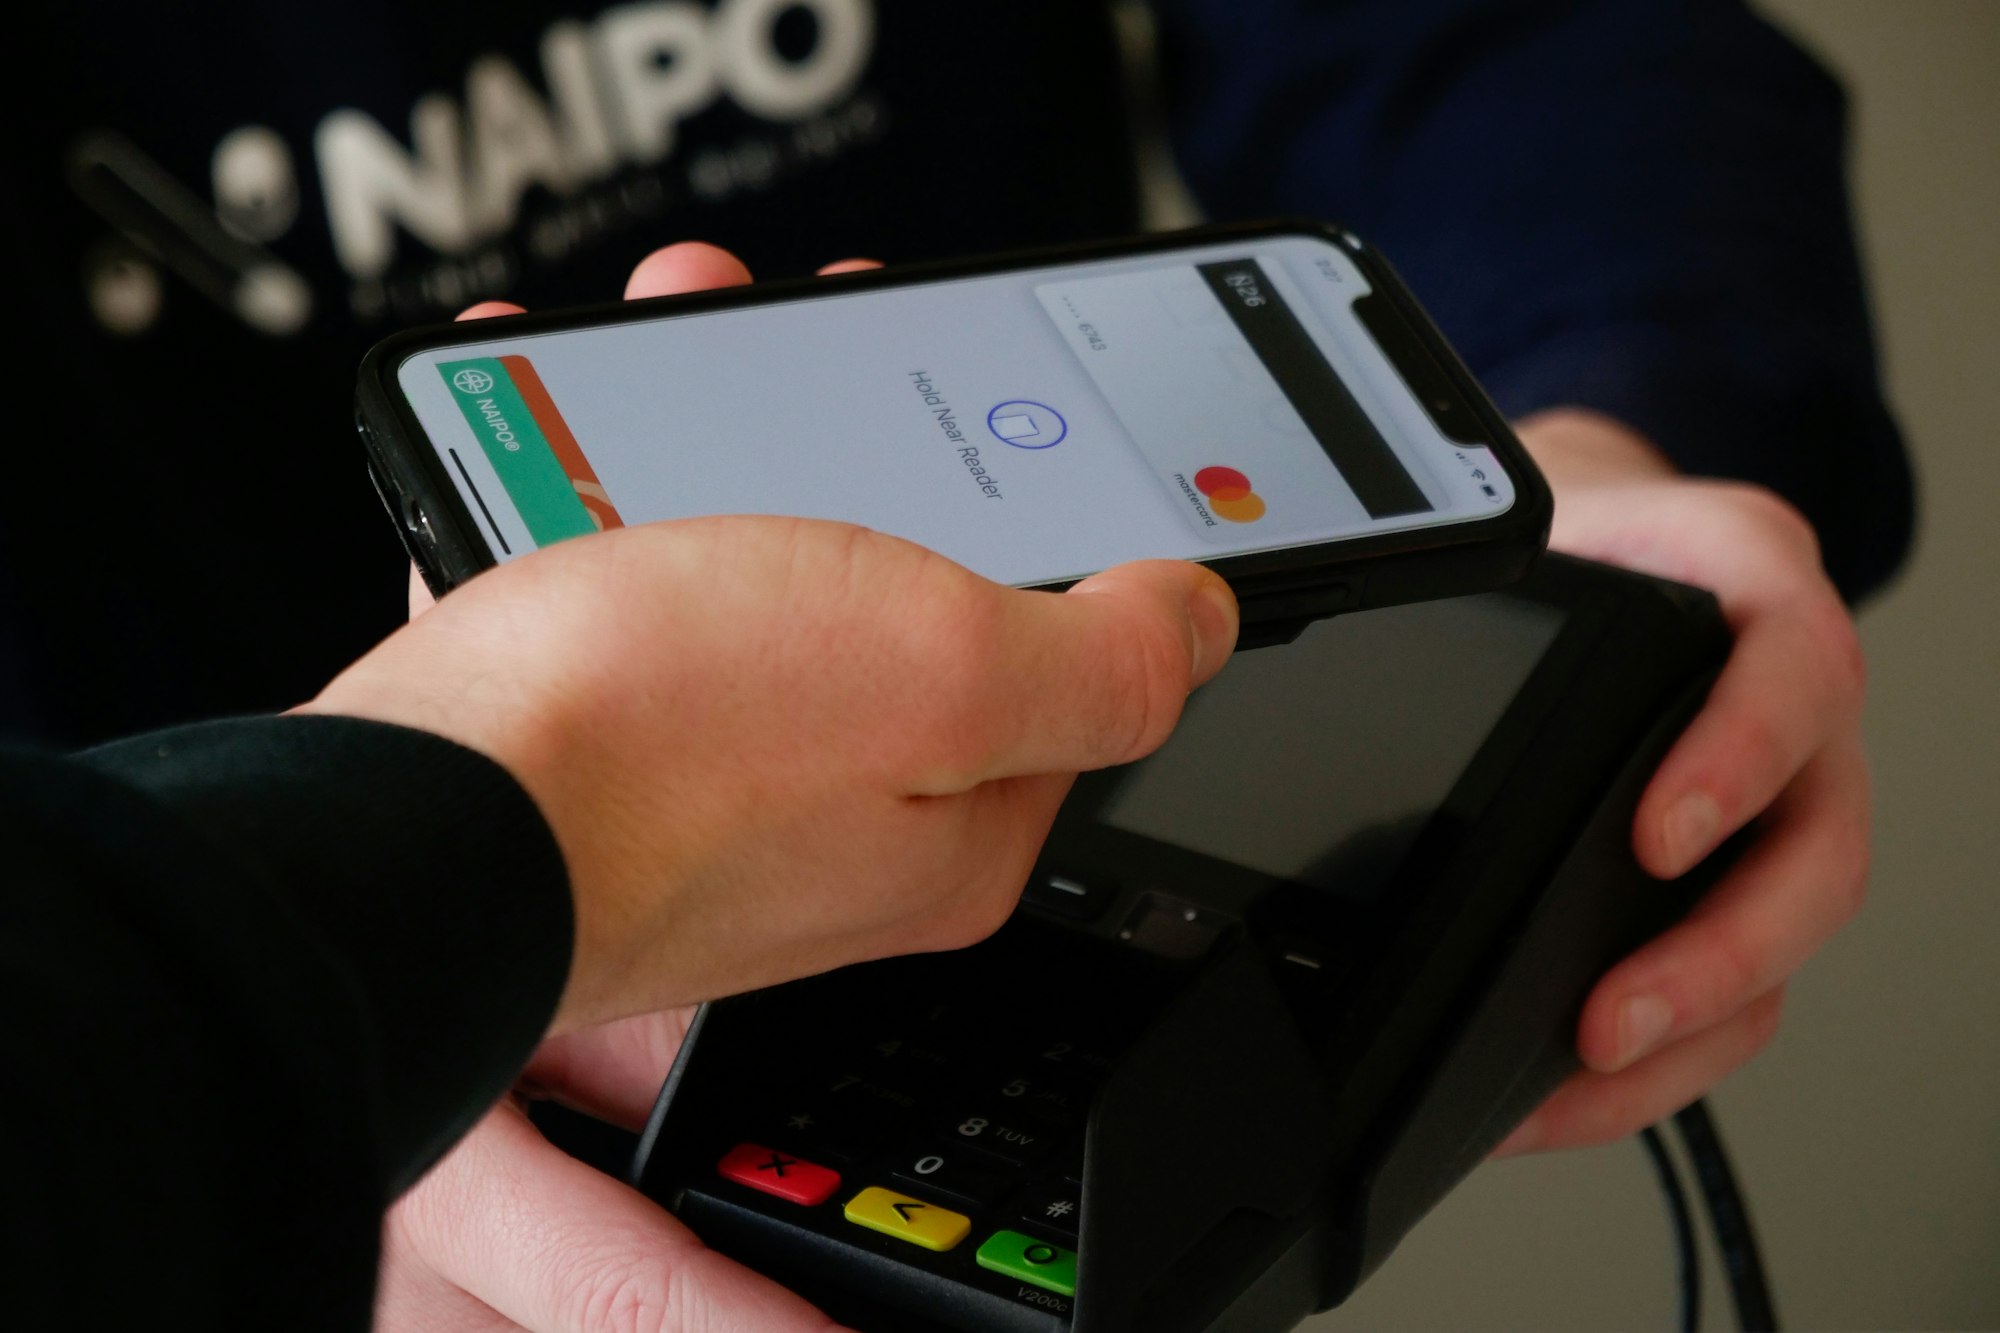 PicPay integrates Apple, Samsung and Google wallets as mobile payment options in Brazil